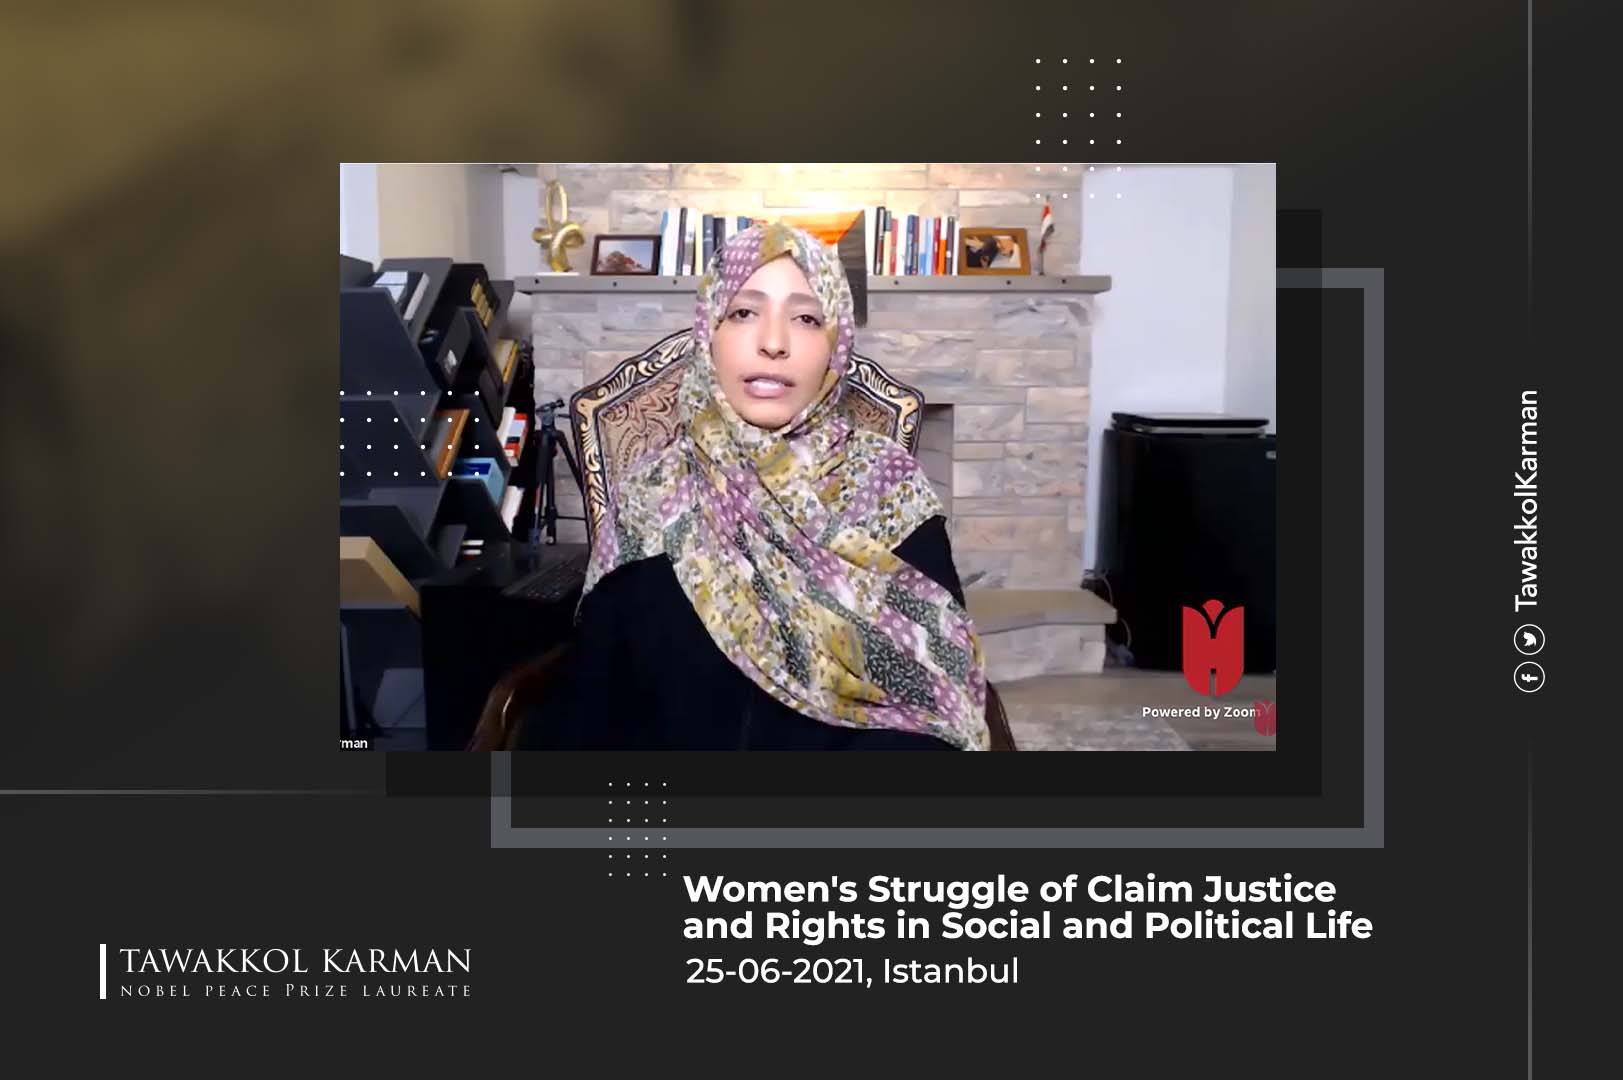 Tawakkol Karman Lecture "Women's Struggle of Claim Justice and Rights in Social and Political Life"